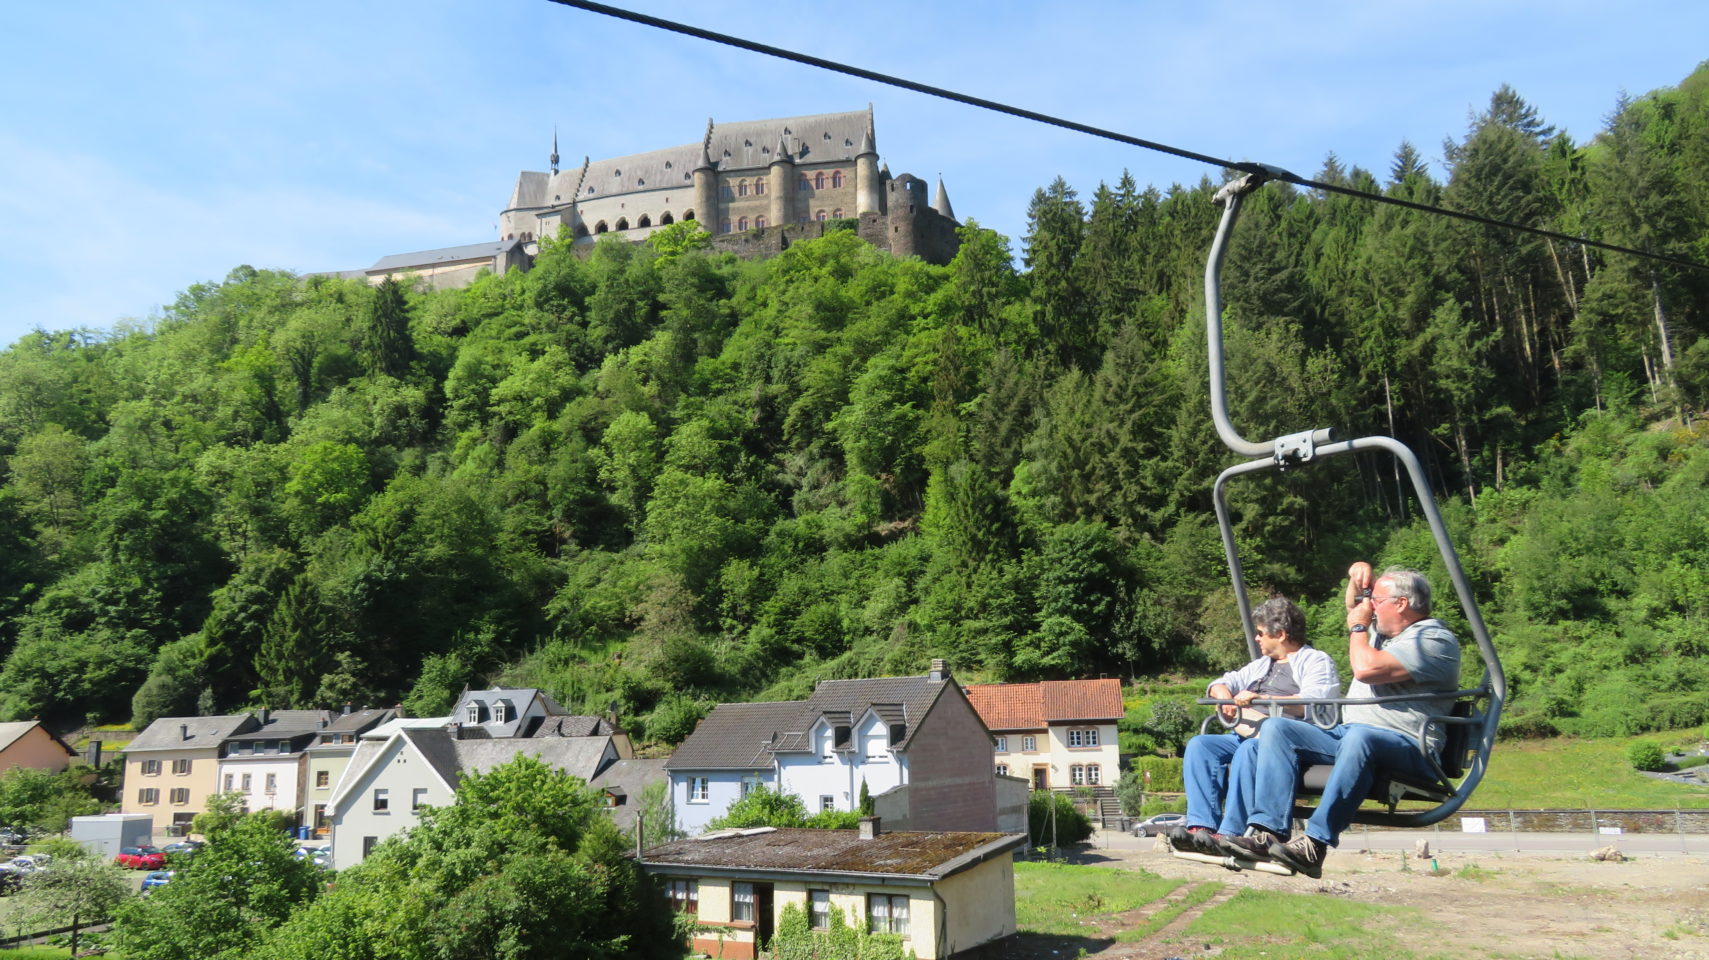 Chair Lift and Vianden Castle in Vianden, <em><strong>Luxembourg</strong></em>